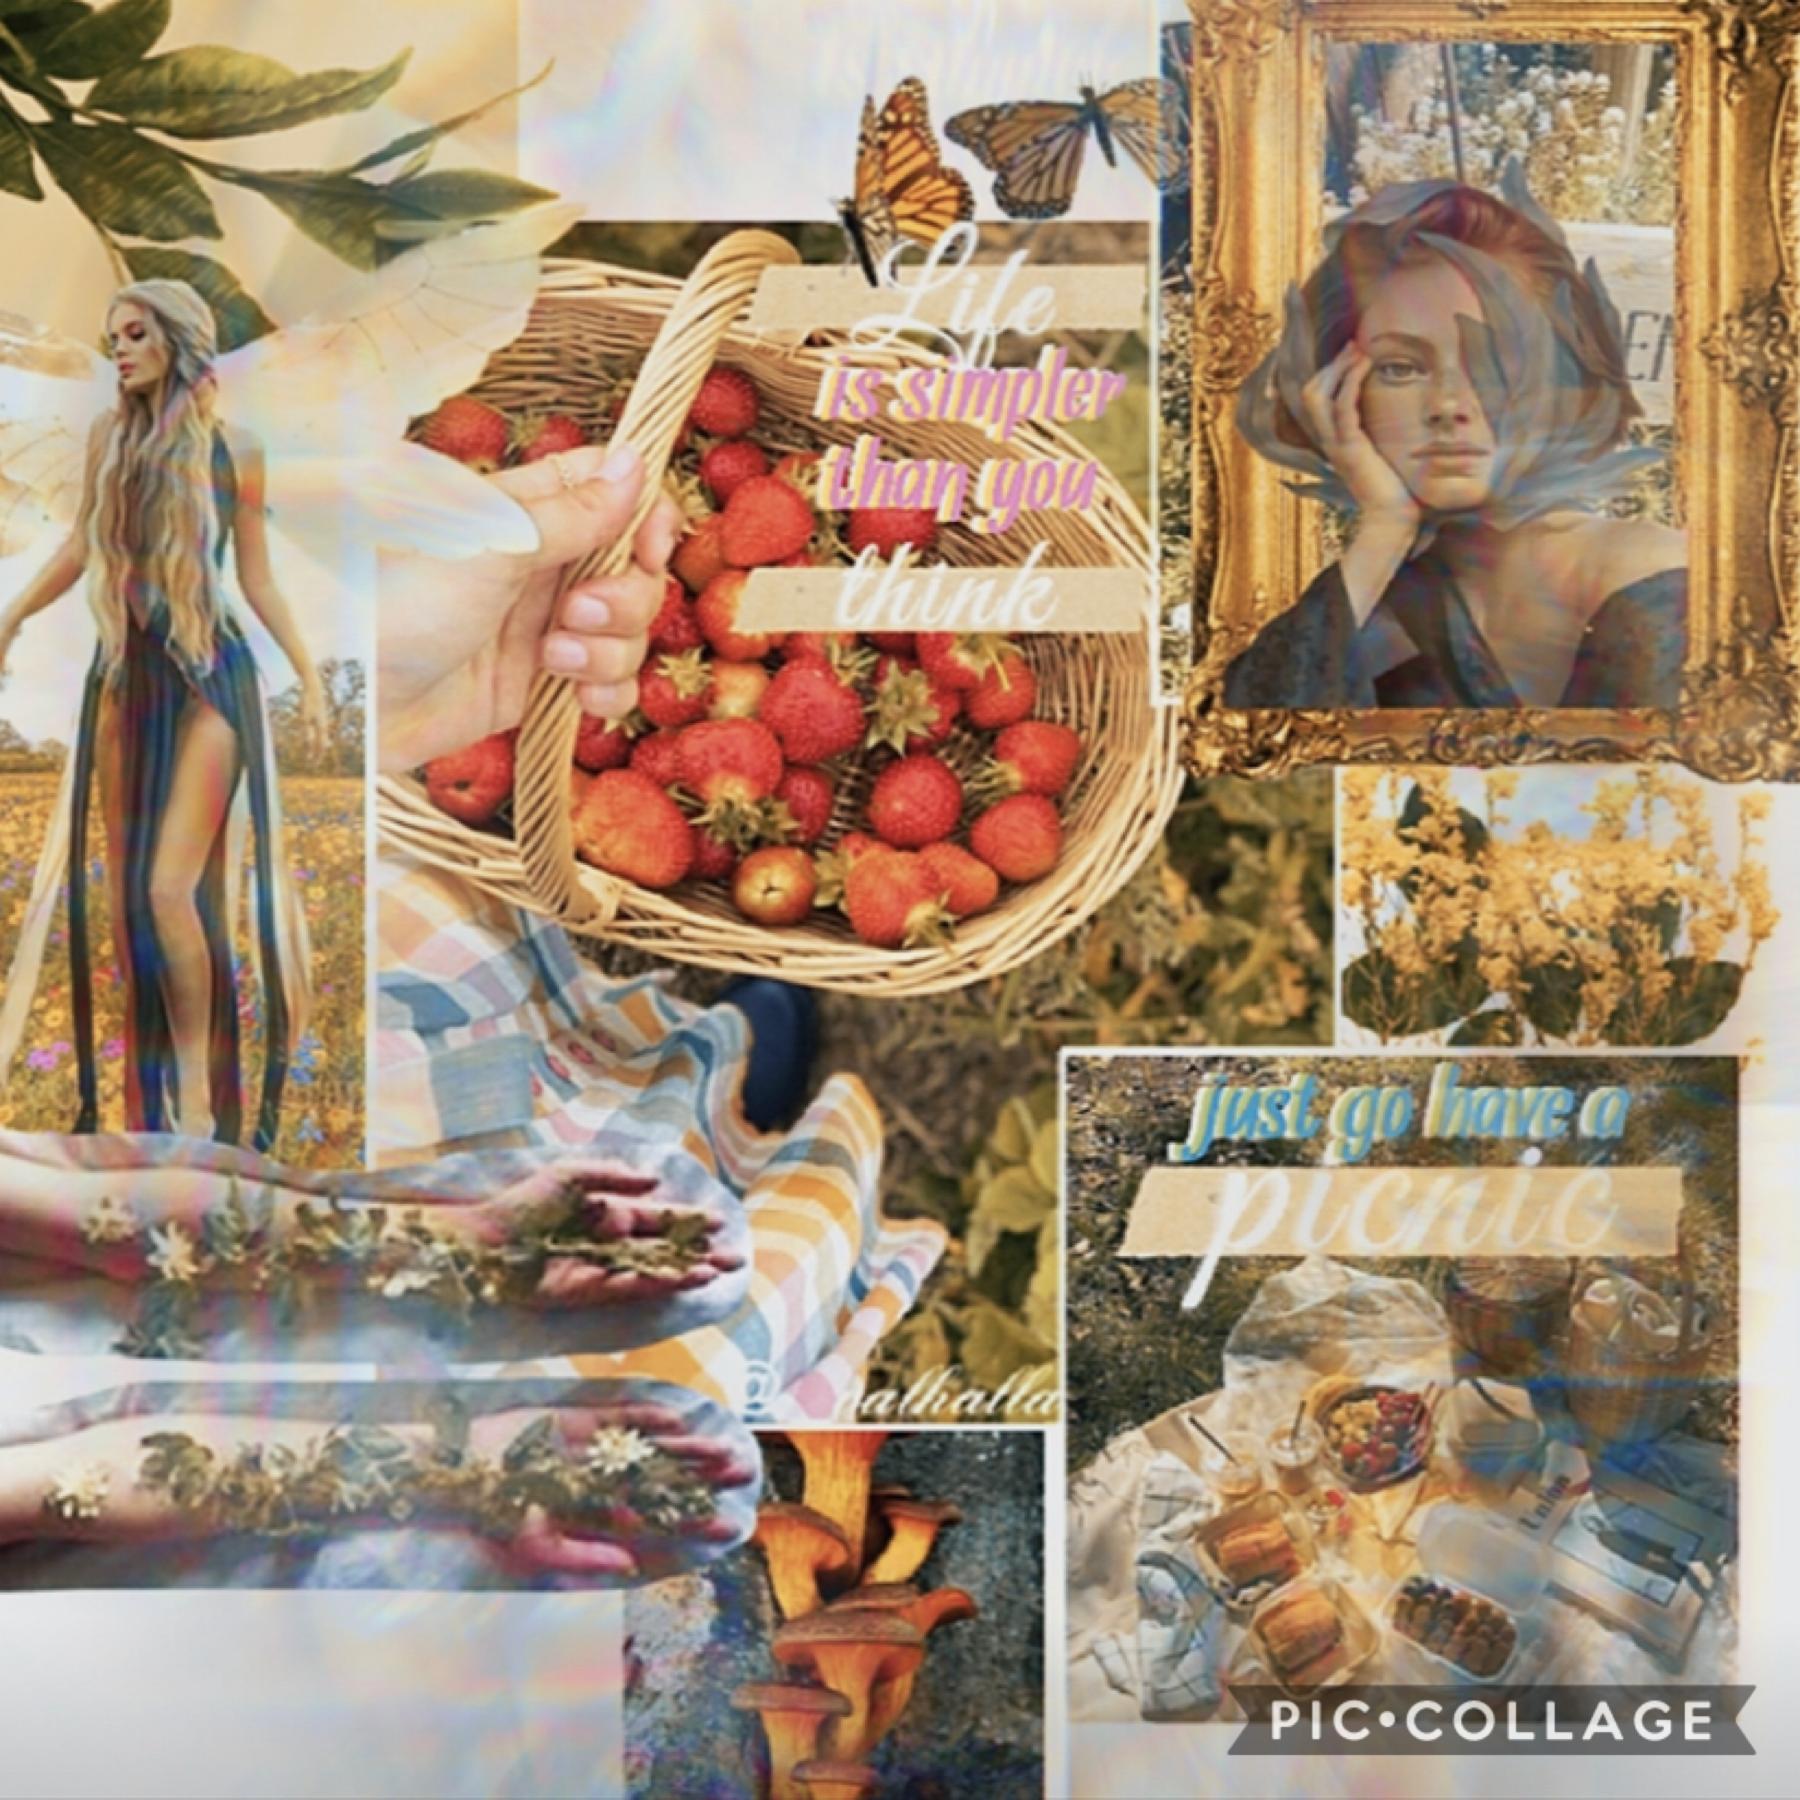 🍓tap!🍓
This collage took so long to make and it was a lot of trial and error, but I couldn’t have done it without the help of my best friend in the entire world, Kat @nightprowess-blm.
Thanks so much Kat and I hope you all like it!